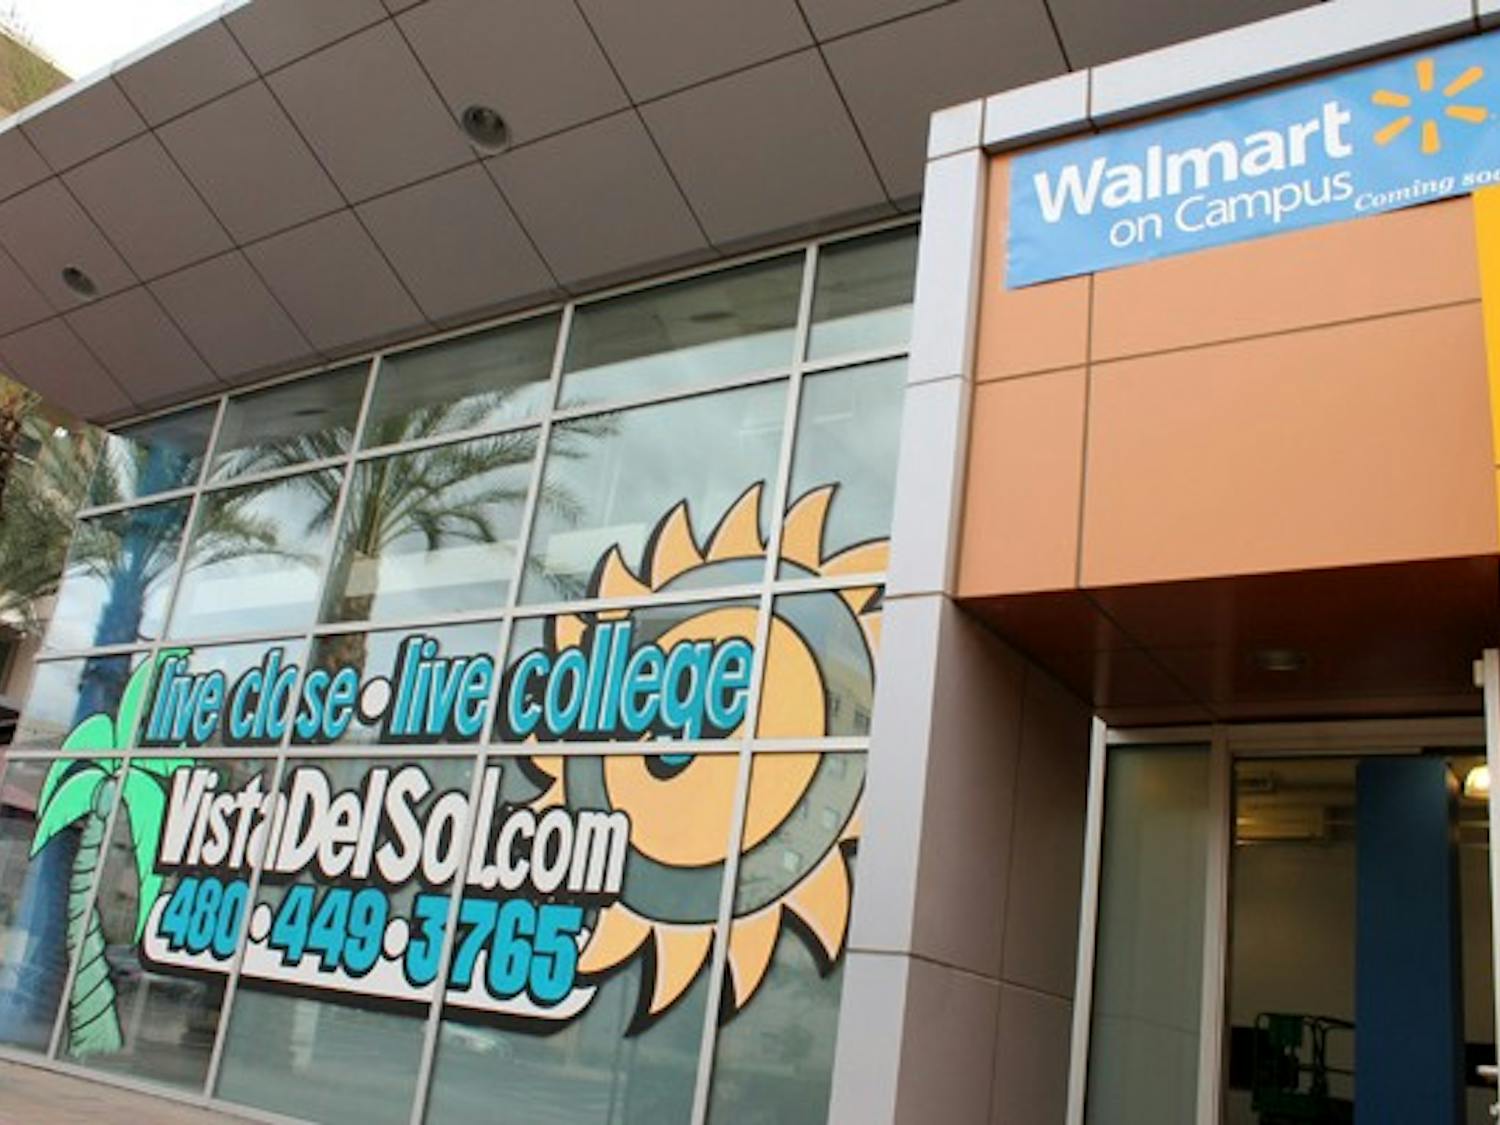 Wal-Mart is opening in the retail section of Vista Del Sol. The story plans on providing convenient shopping for ASU students. (Photo by Laura Davis)